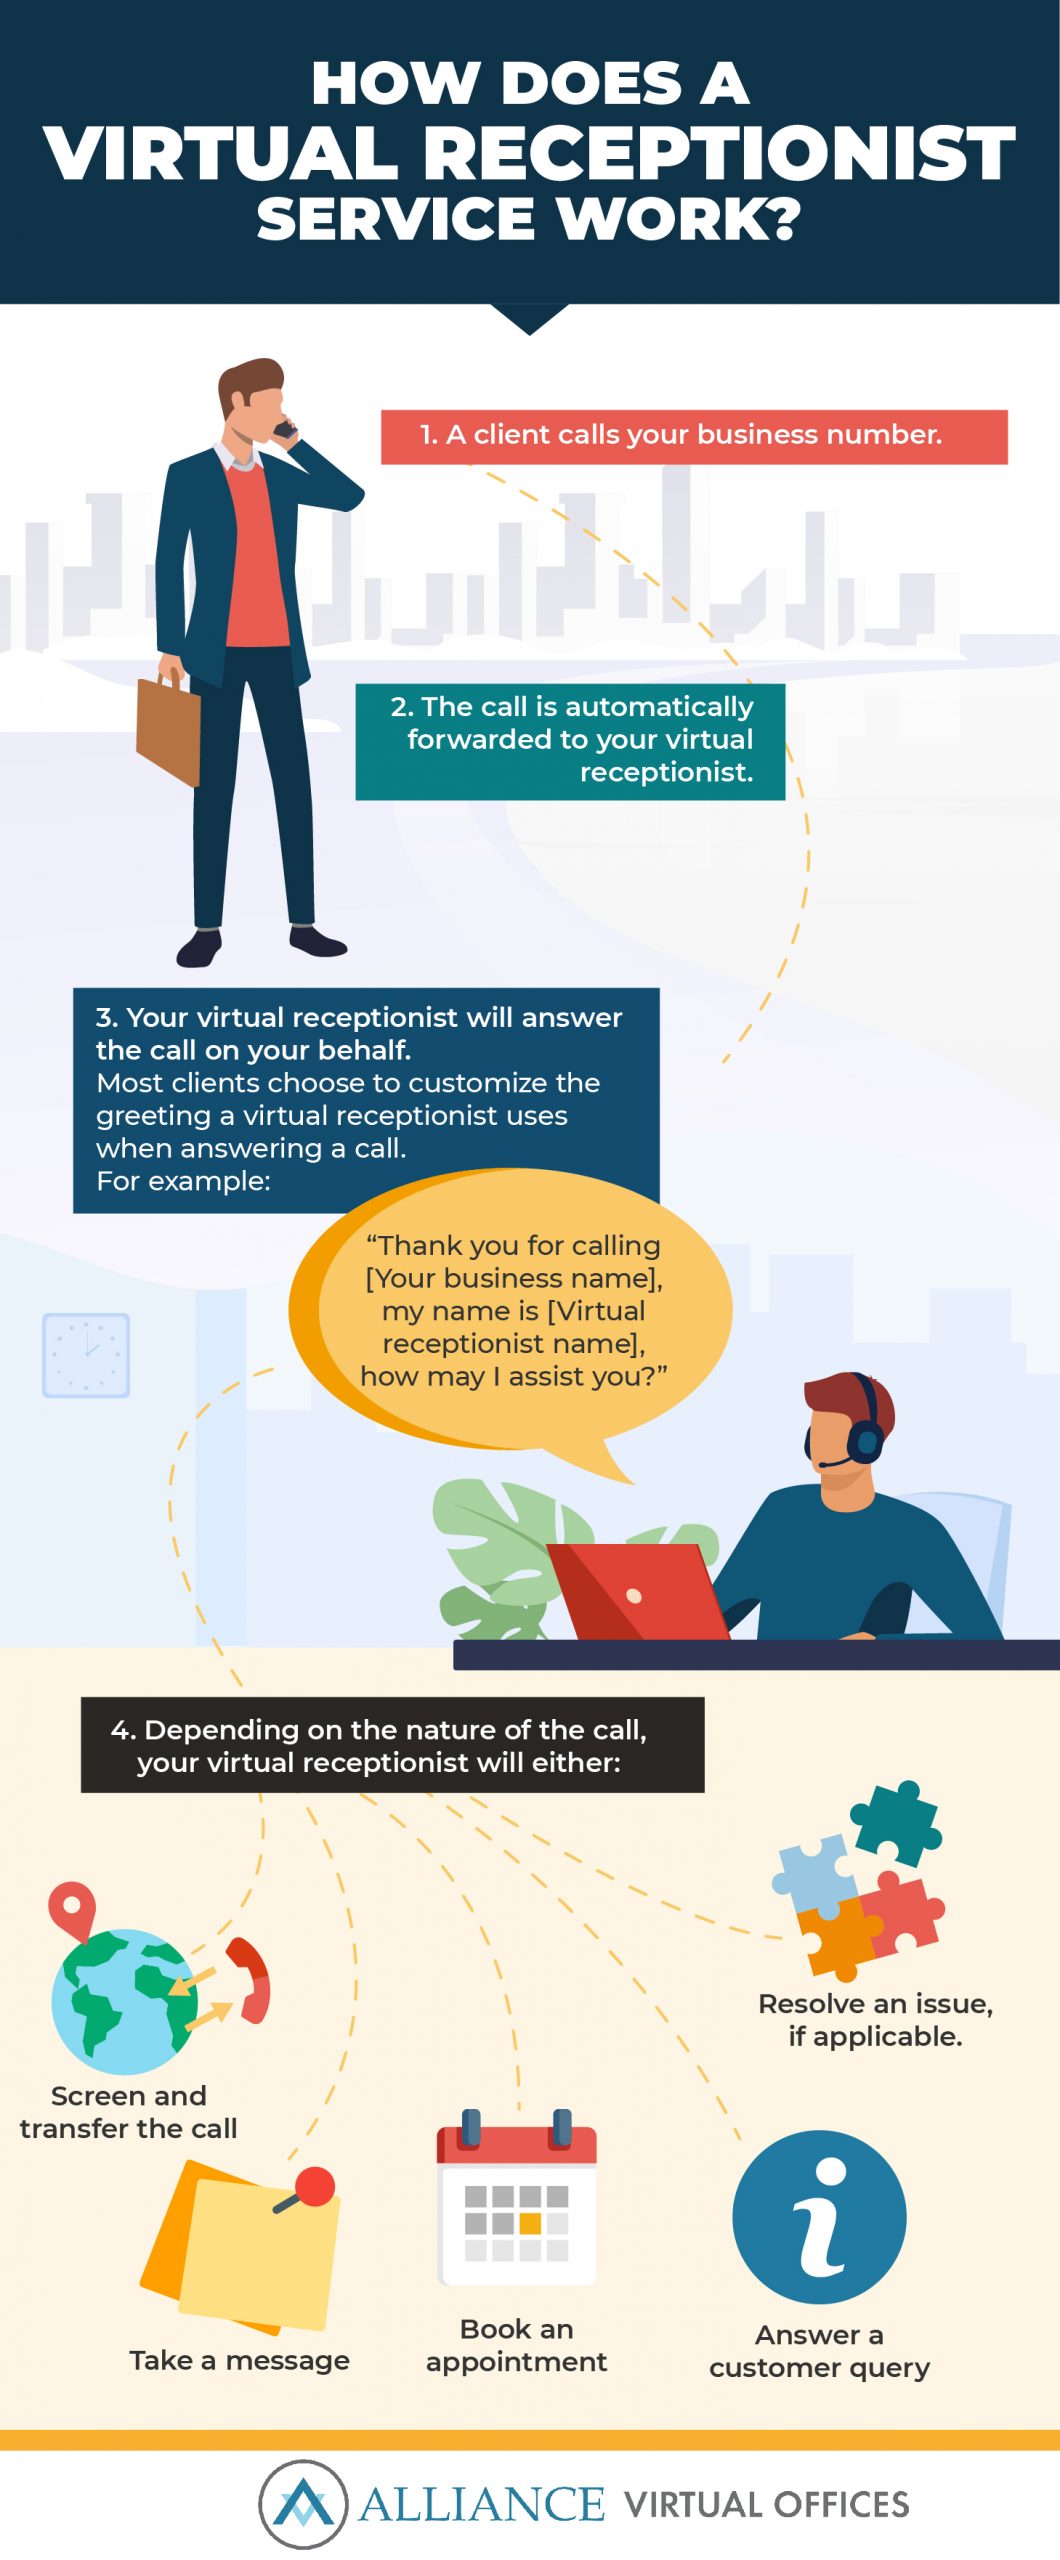 Virtual-Recepcionist-Answer calls.  
Answer commonly asked questions. 
Resolve customer queries and issues.-infographic